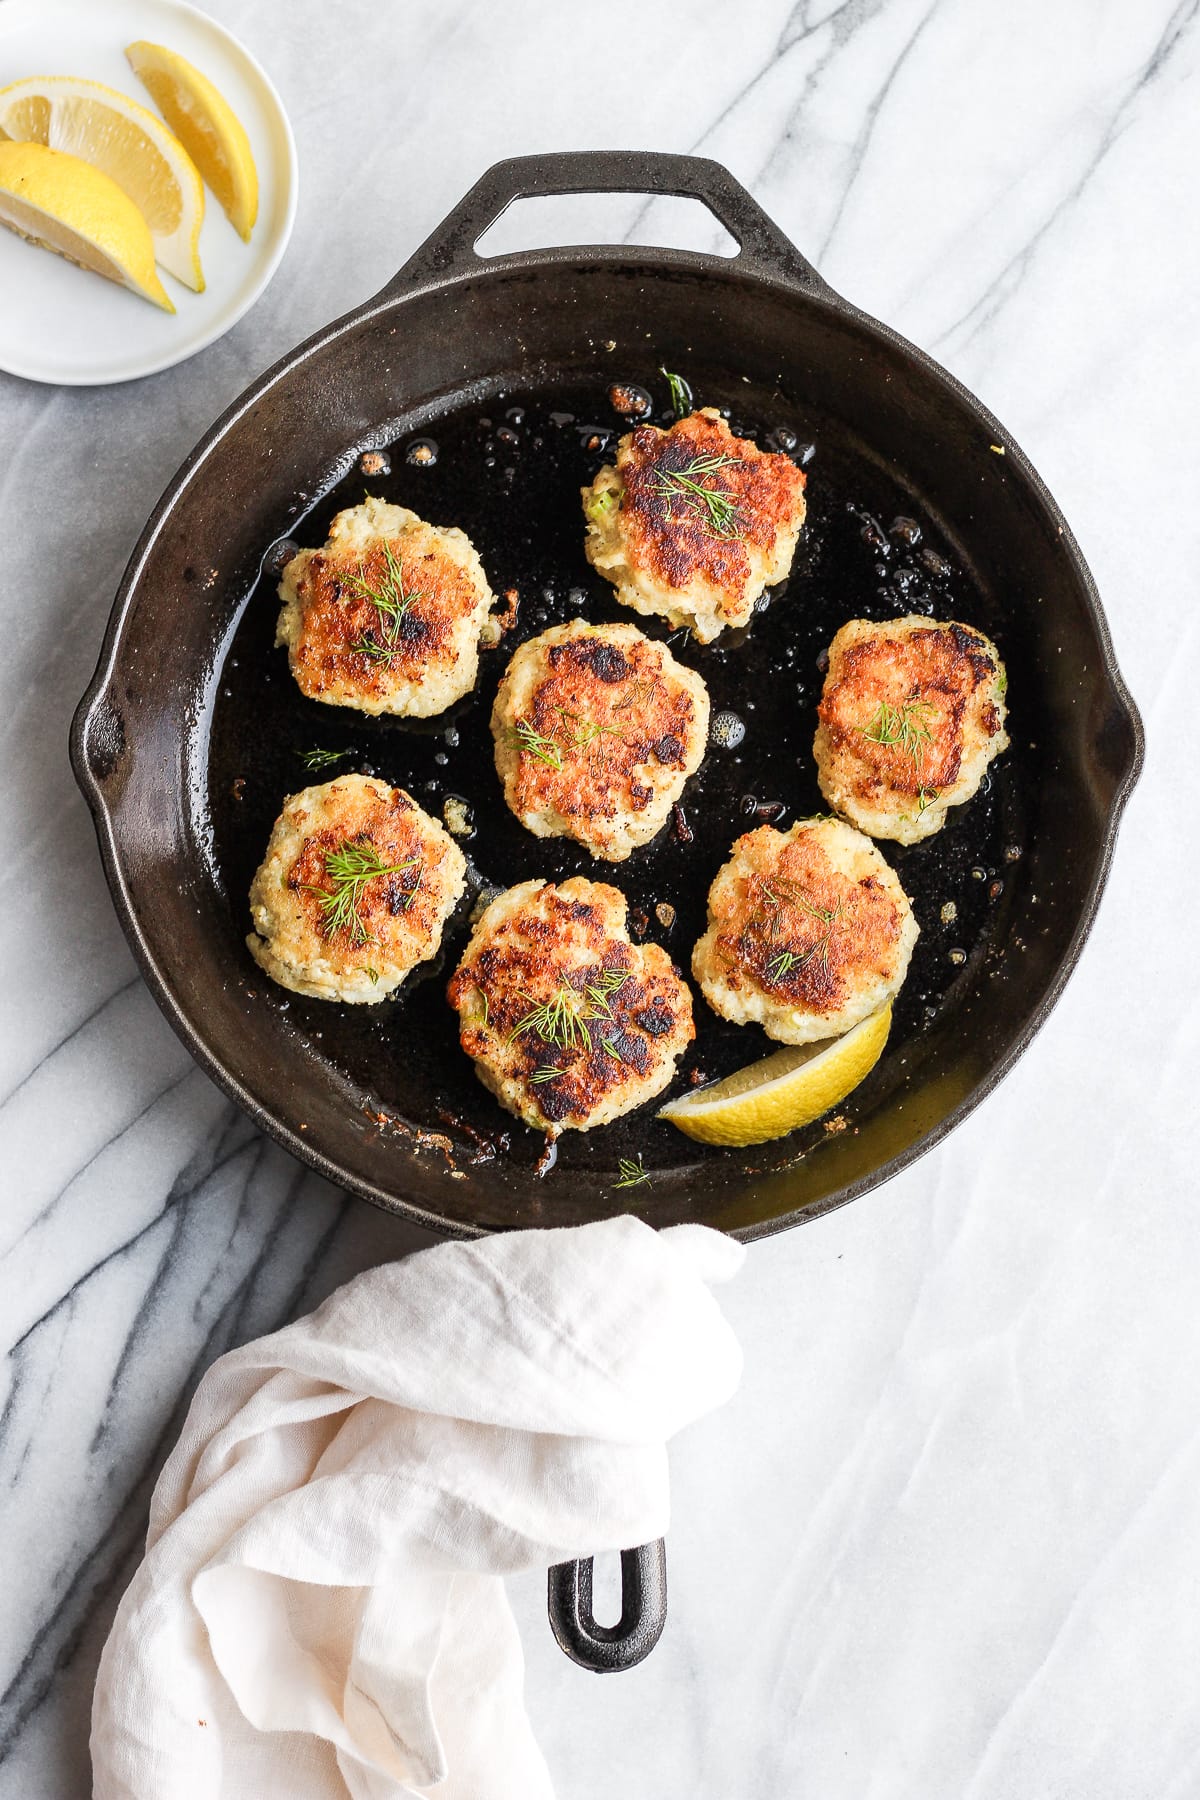 Cod cakes searing in a large cast iron skillet.